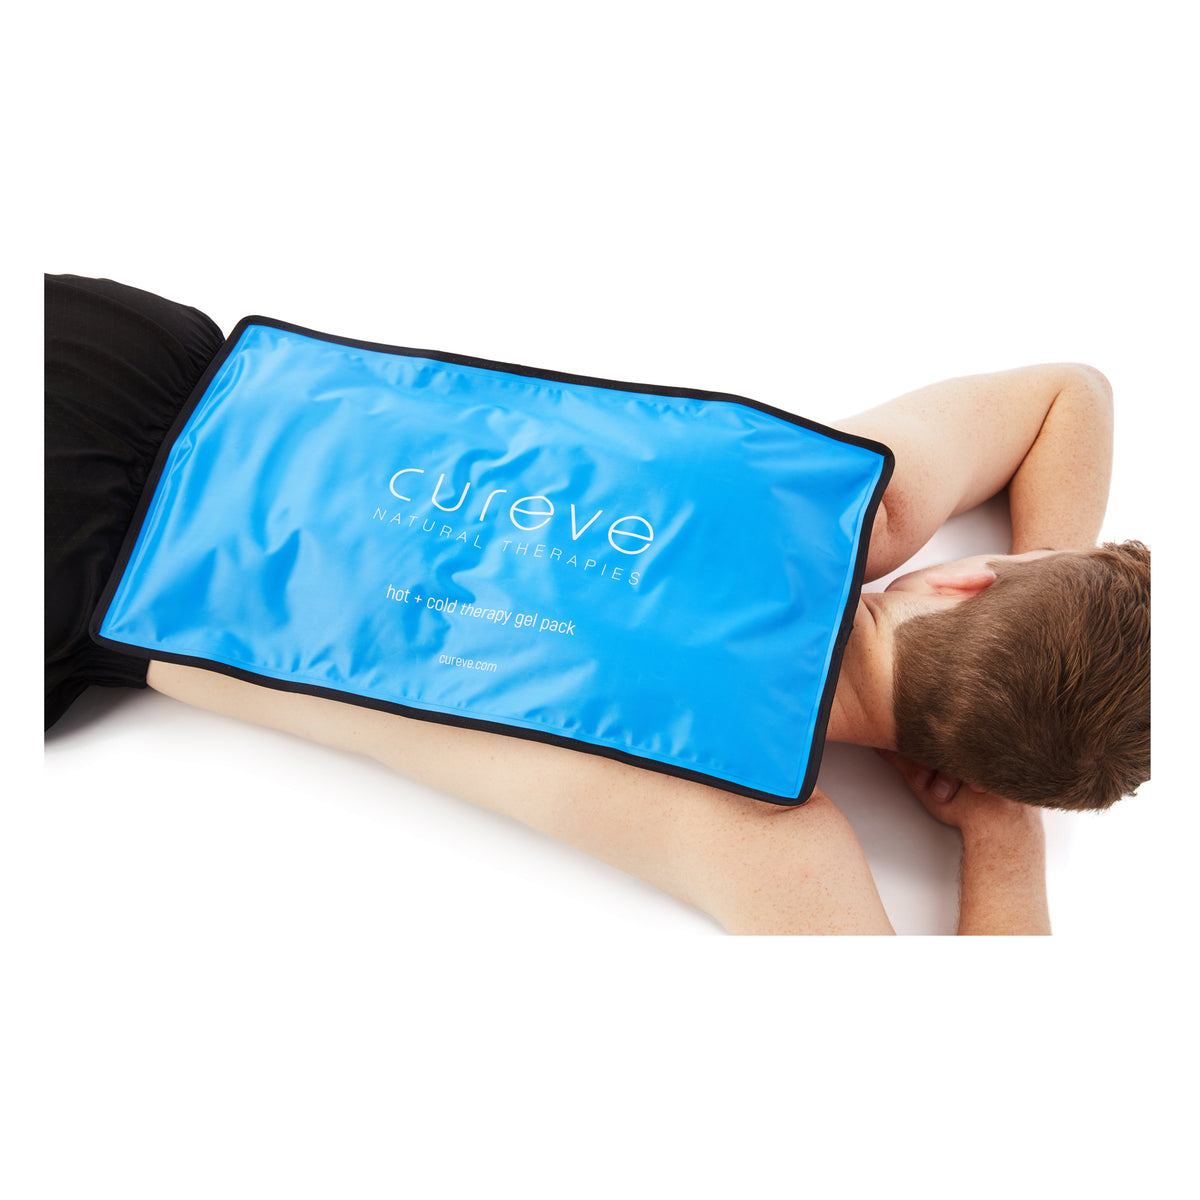 Hot & Cold Therapy Custom Gel Ice Packs